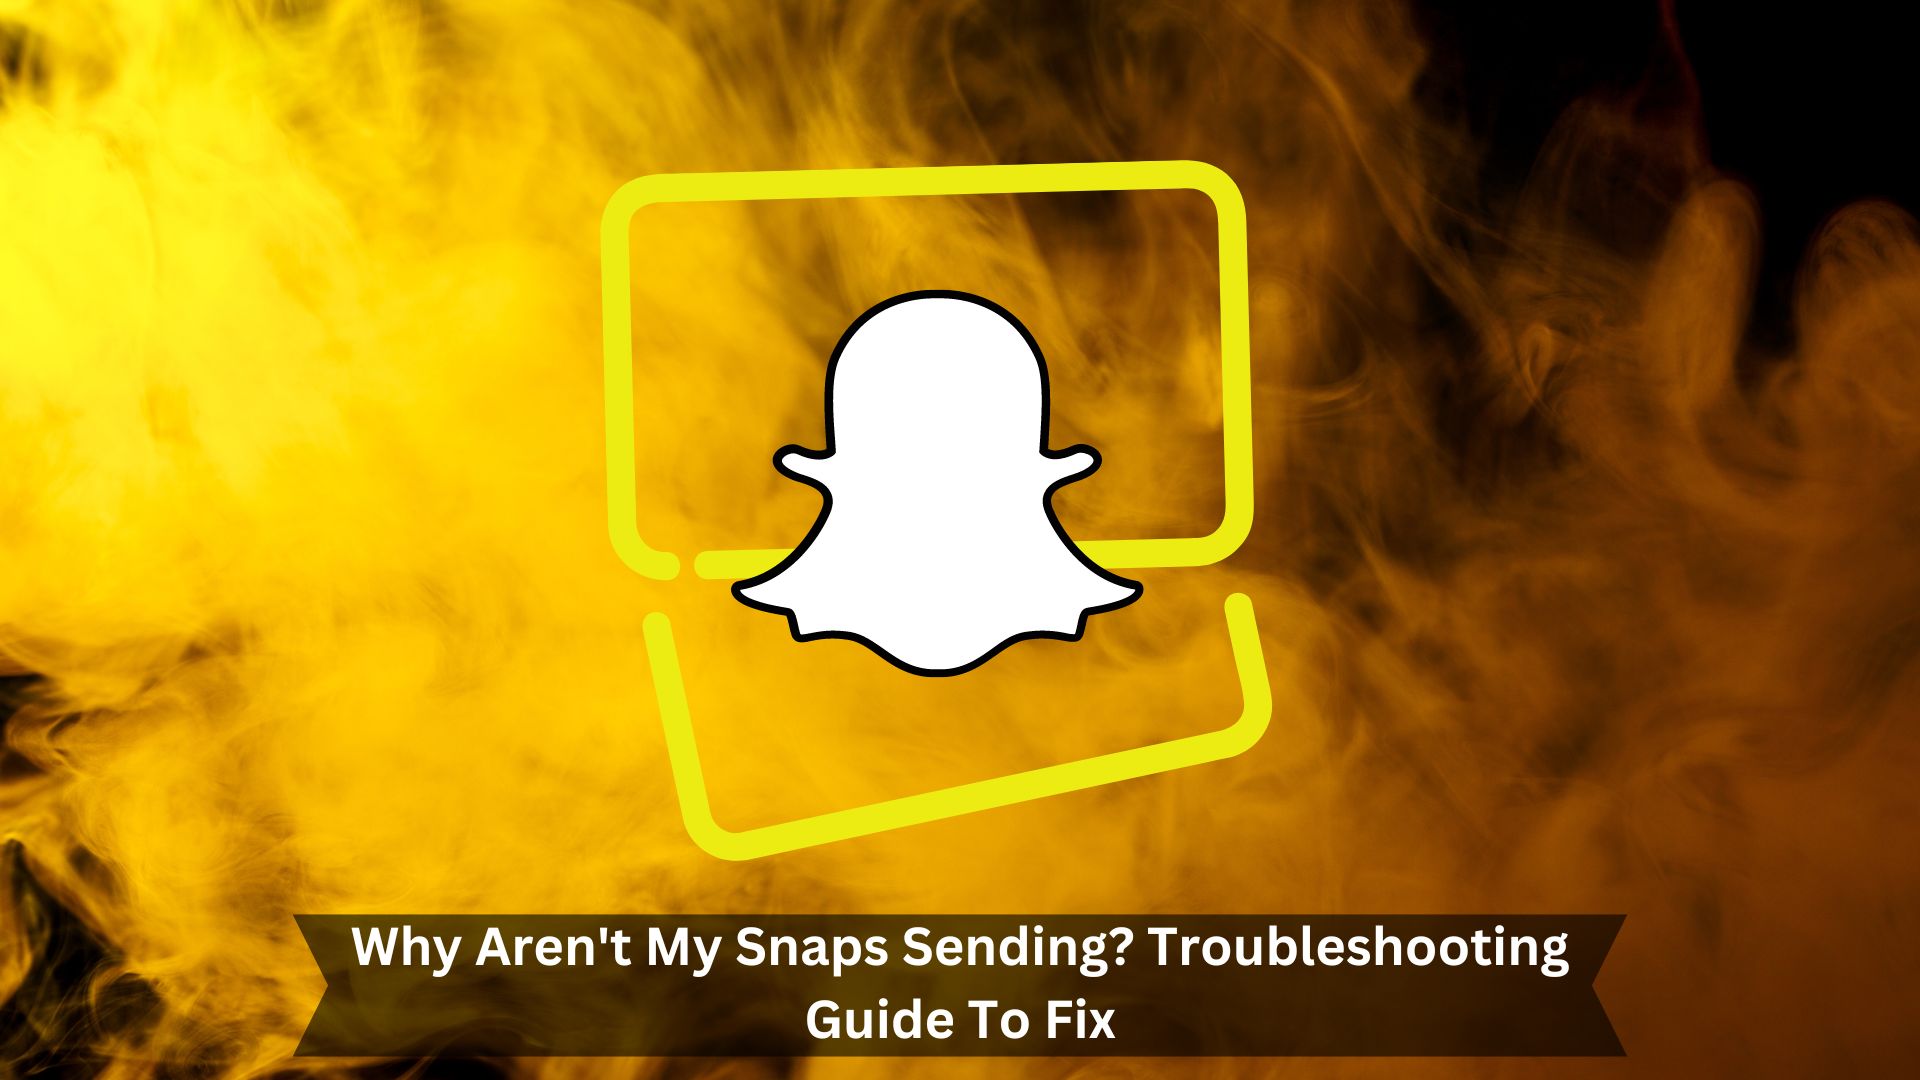 Why-Arent-My-Snaps-Sending-Troubleshooting-Guide-To-Fix